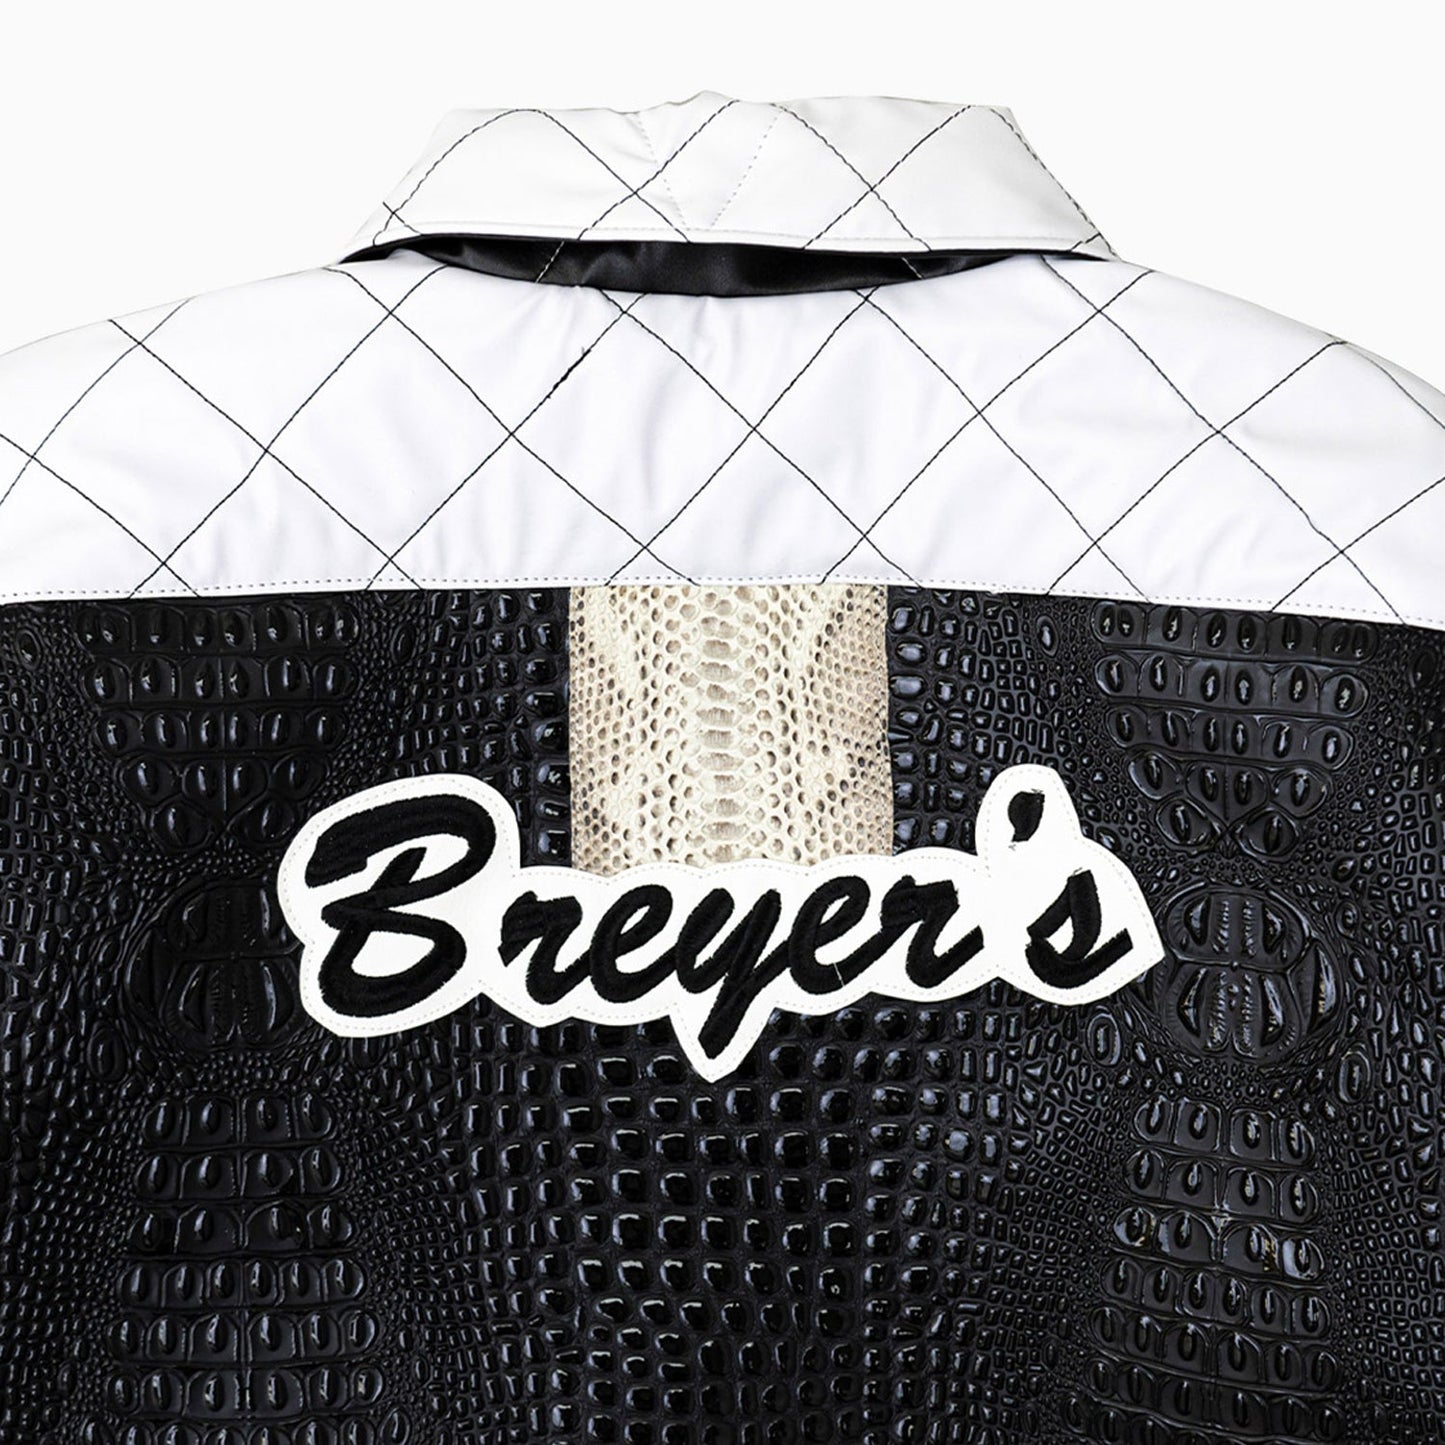 Breyer's Limited Edition Leather Jacket With Python Skin